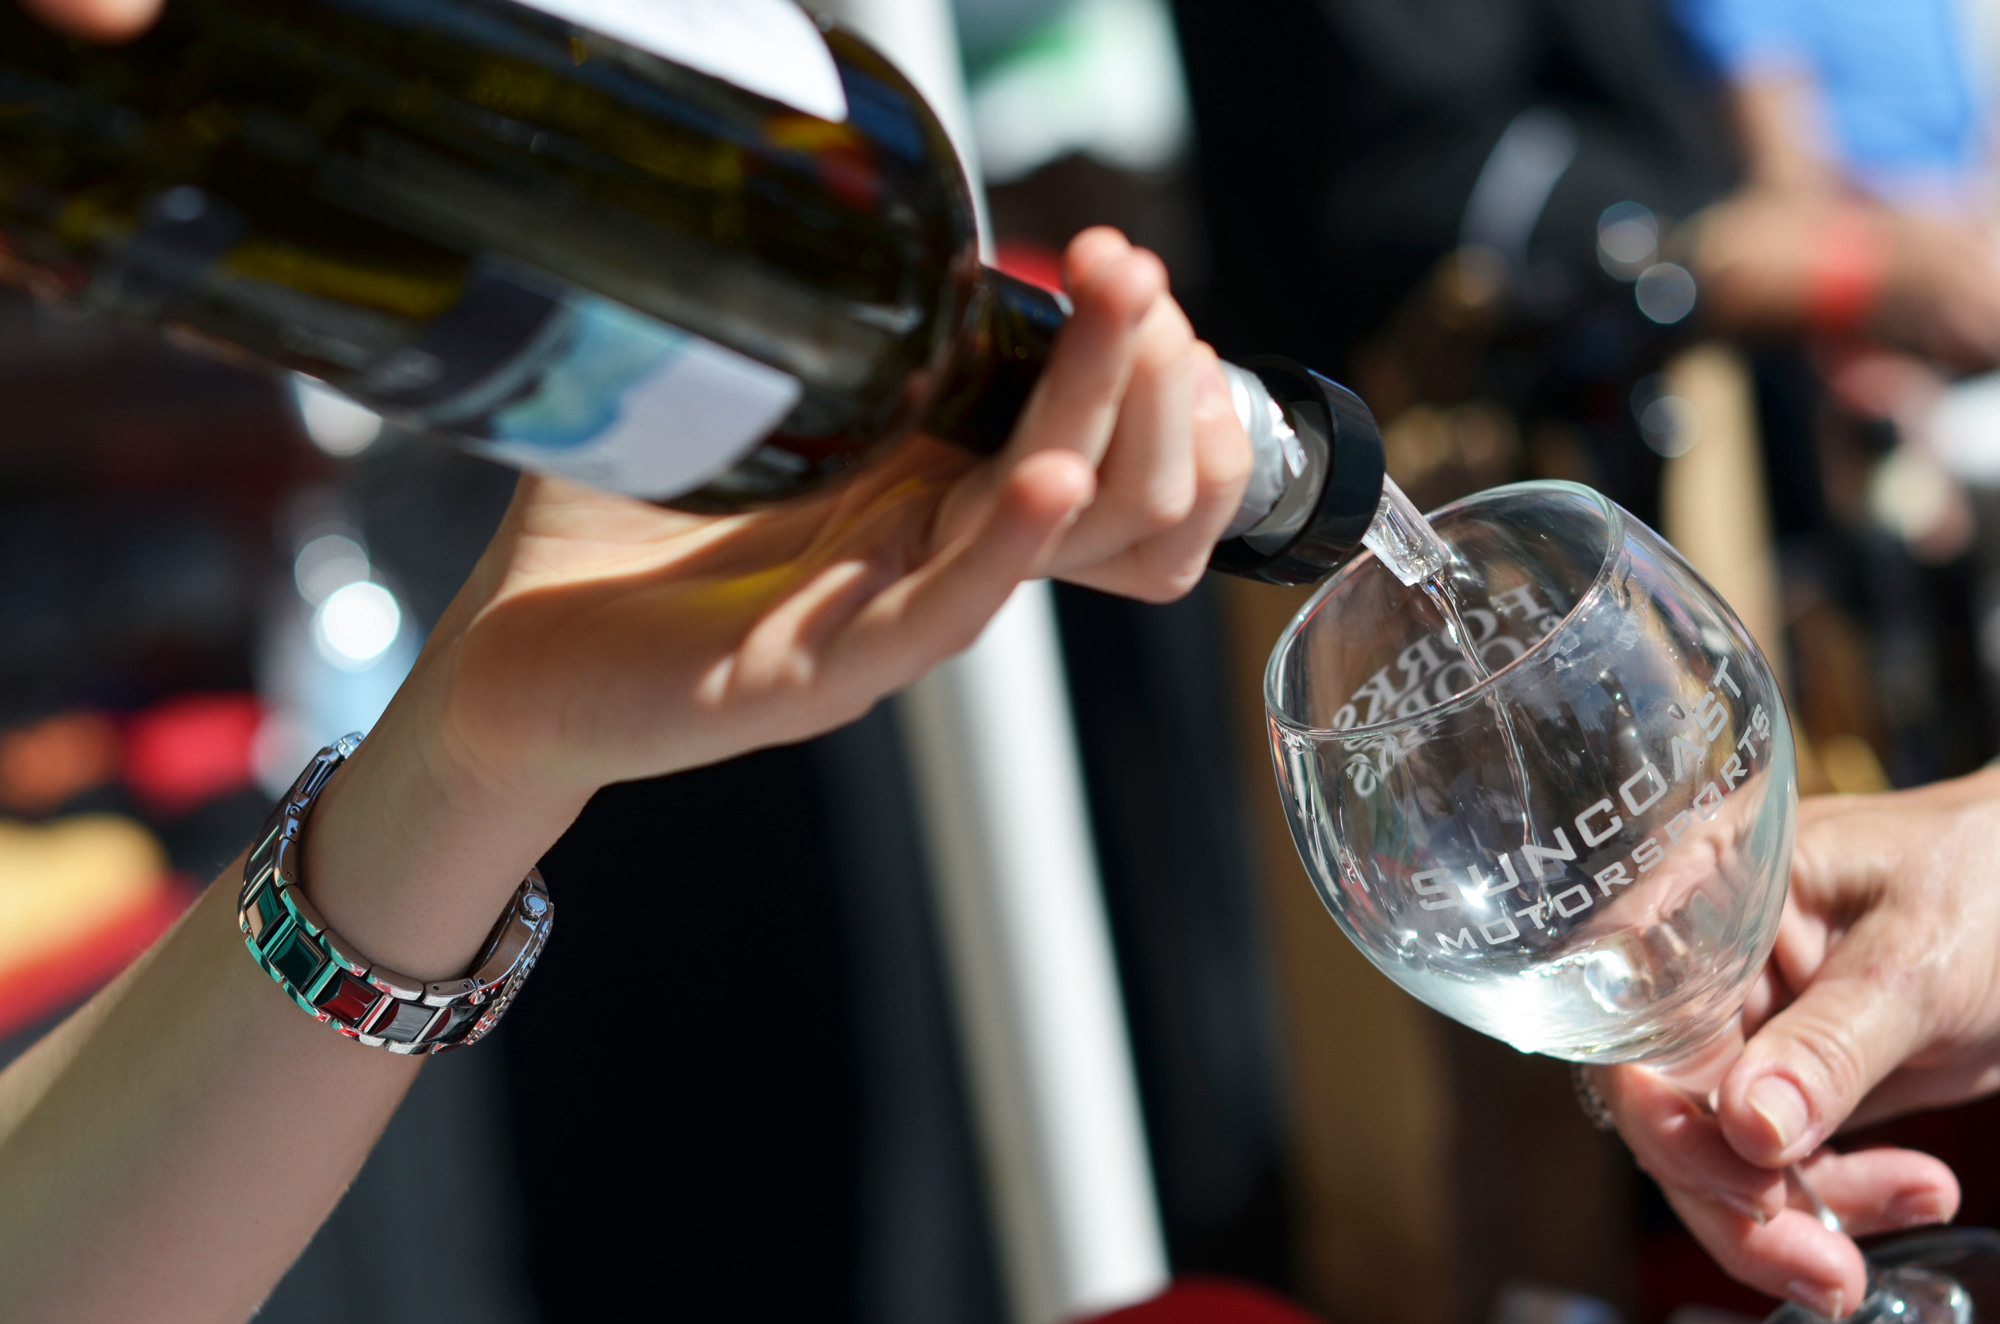 Guests will have the opportunity to sample wines from 85 wineries at The Grand Tasting Jan. 29. File photo